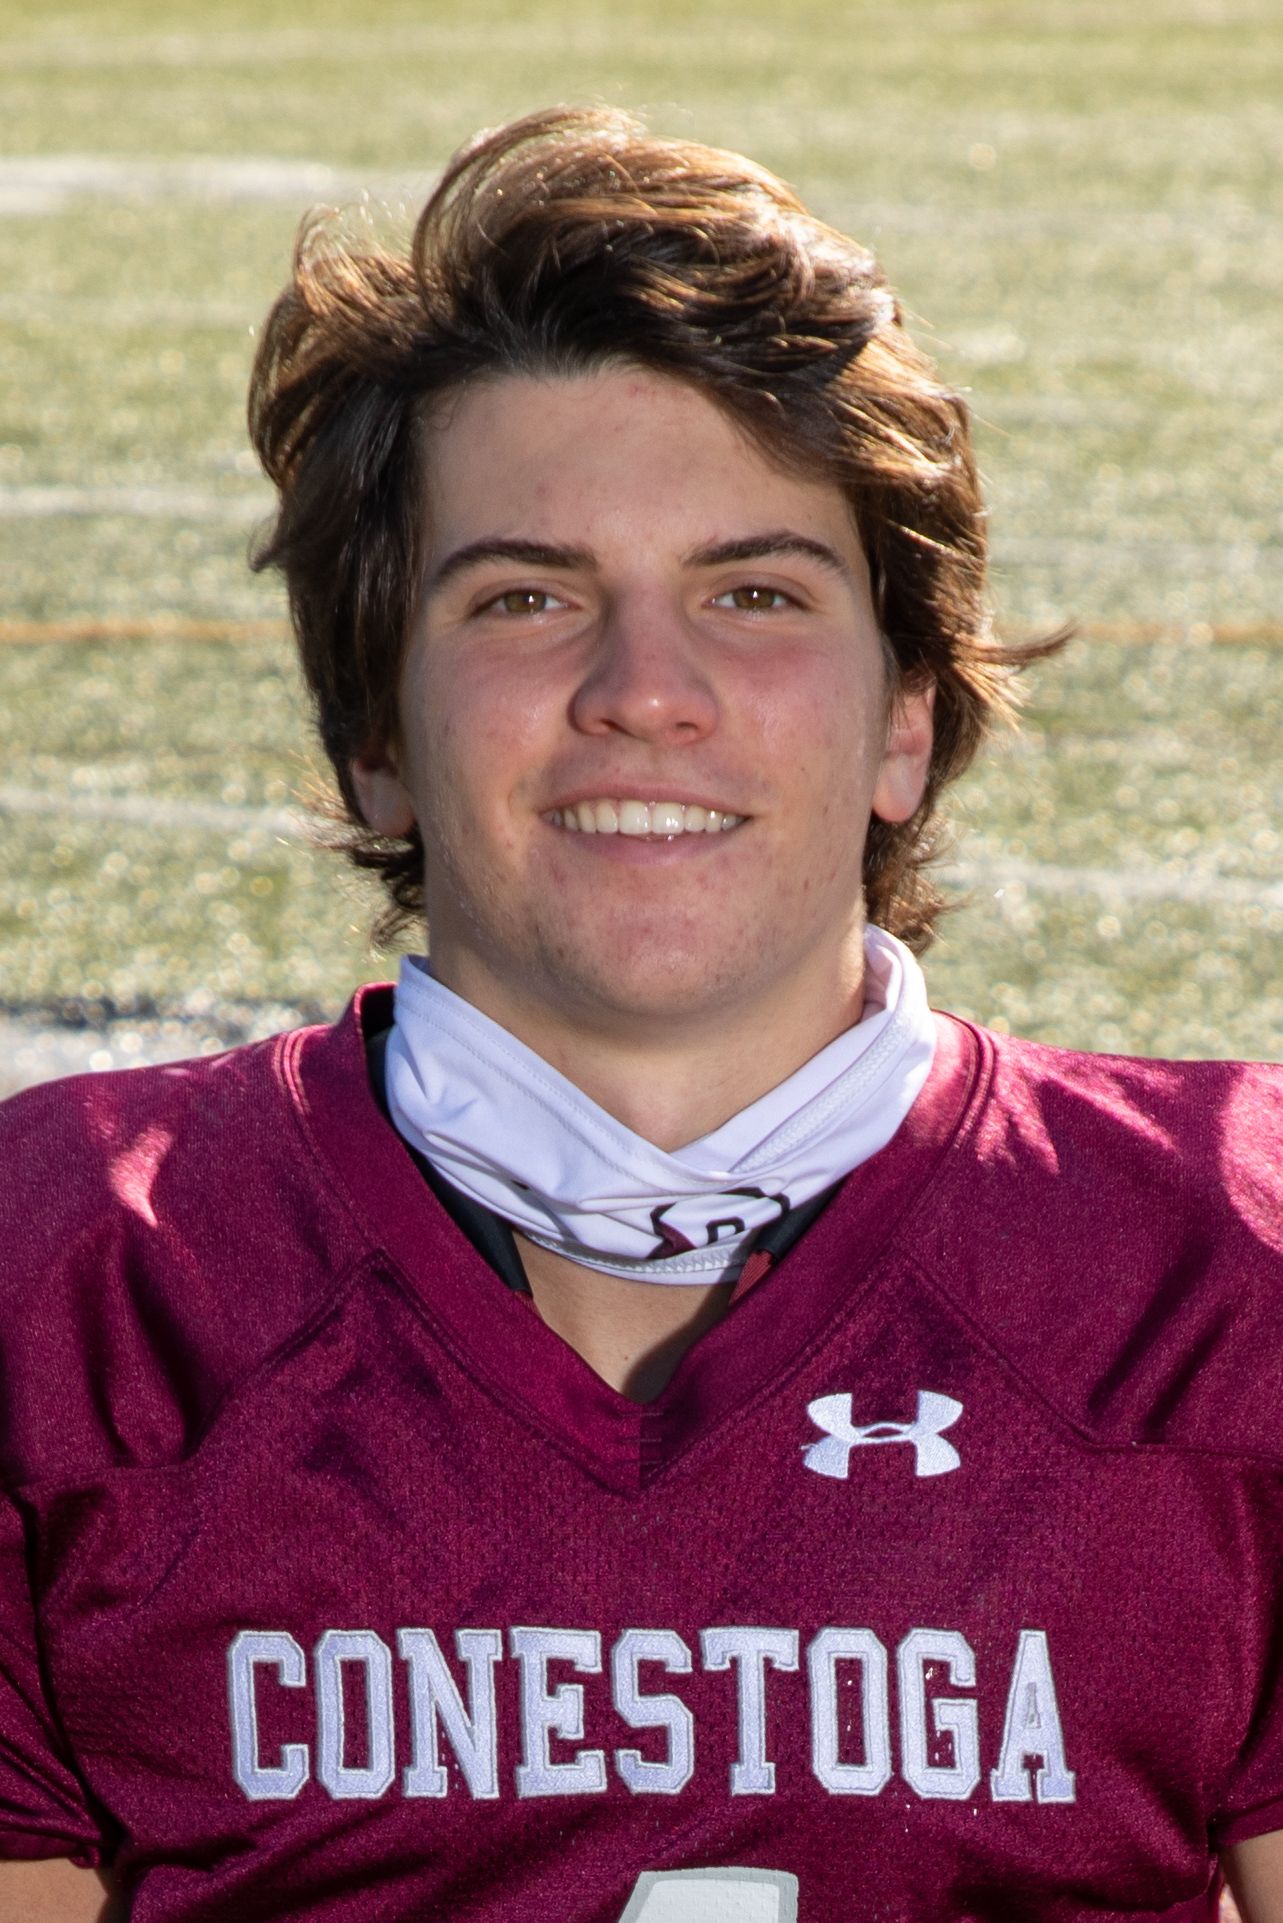 Conestoga’s Peter Detwiler is Main Line Boys Athlete of the Week – PA ...